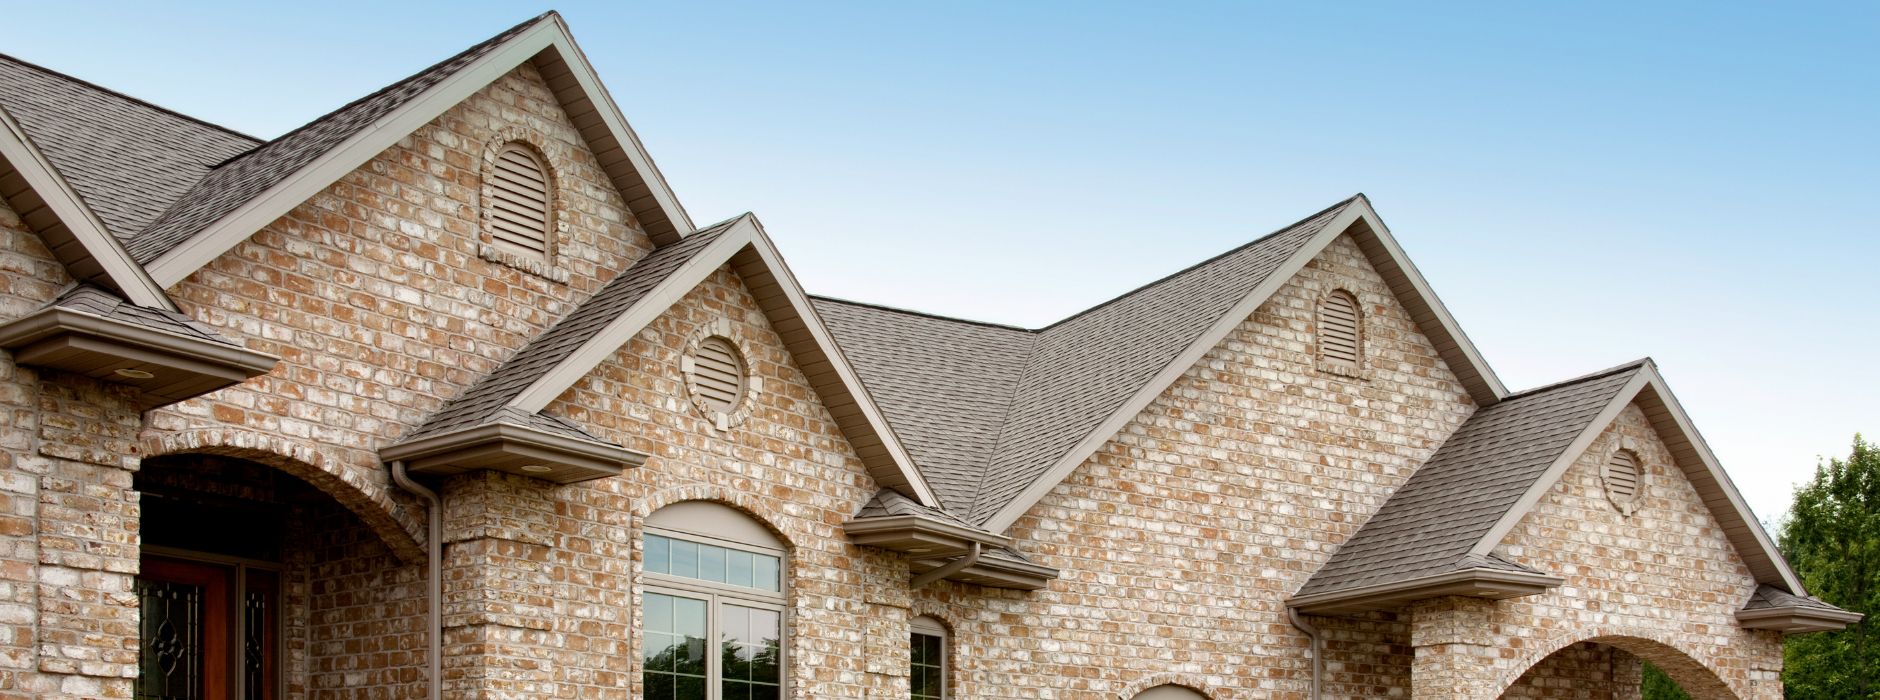 Roofing Facts for Homeowners [7 Things to Know]